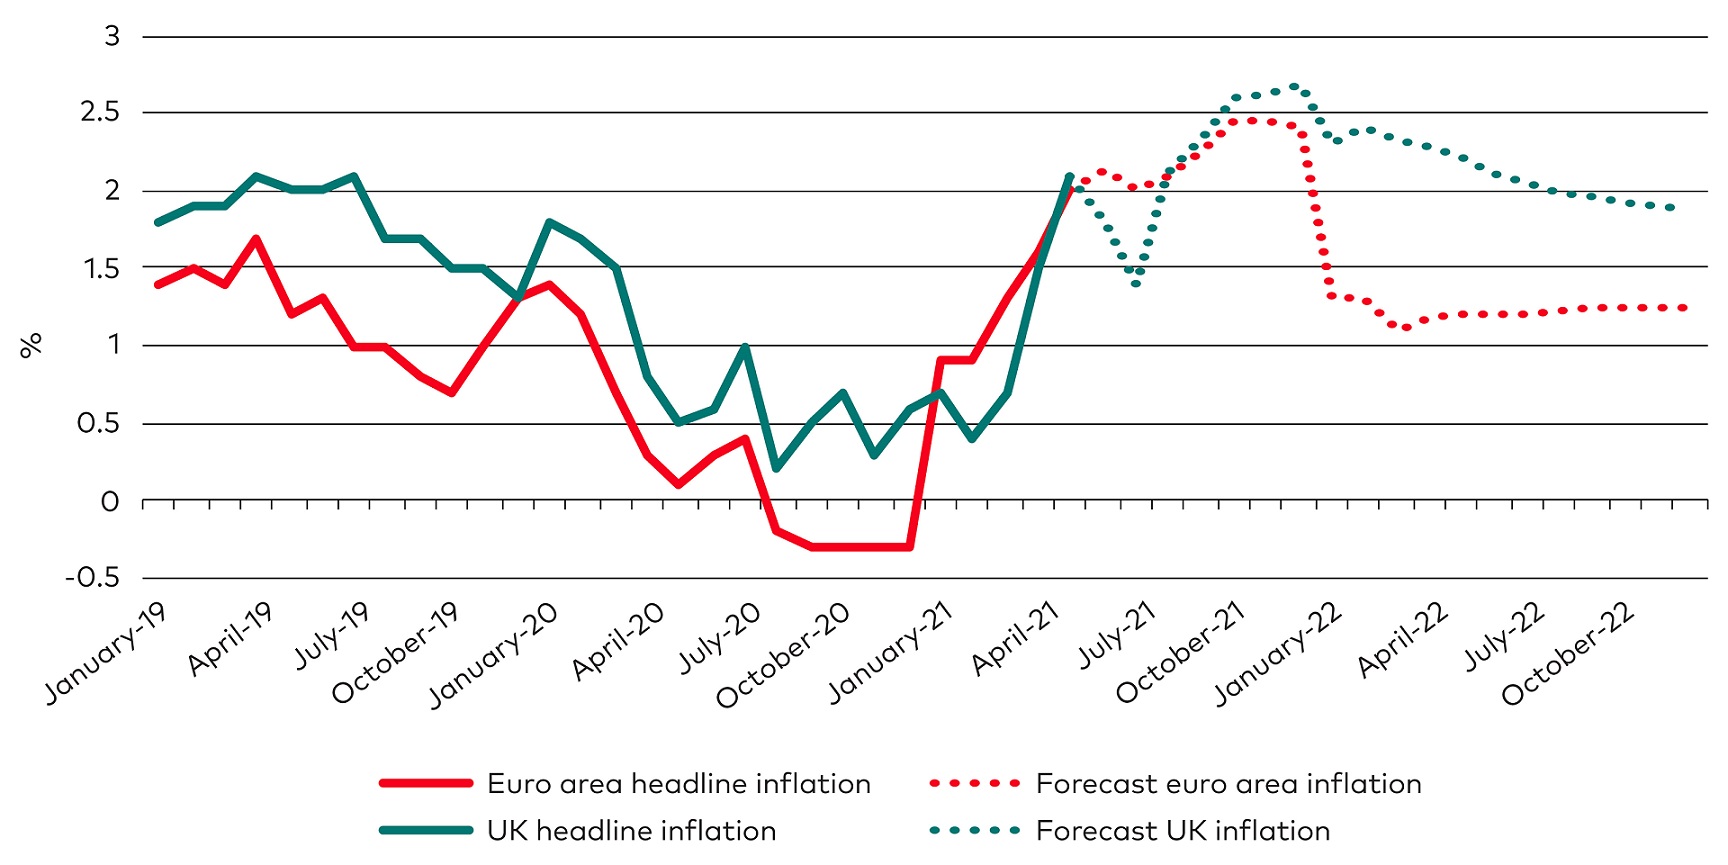 Line chart comparing Euro area headline inflation/Forecast euro area inflation vs. UK headline inflation/Forecast UK inflation in percentage every quarter from January 2019 until October 2022.